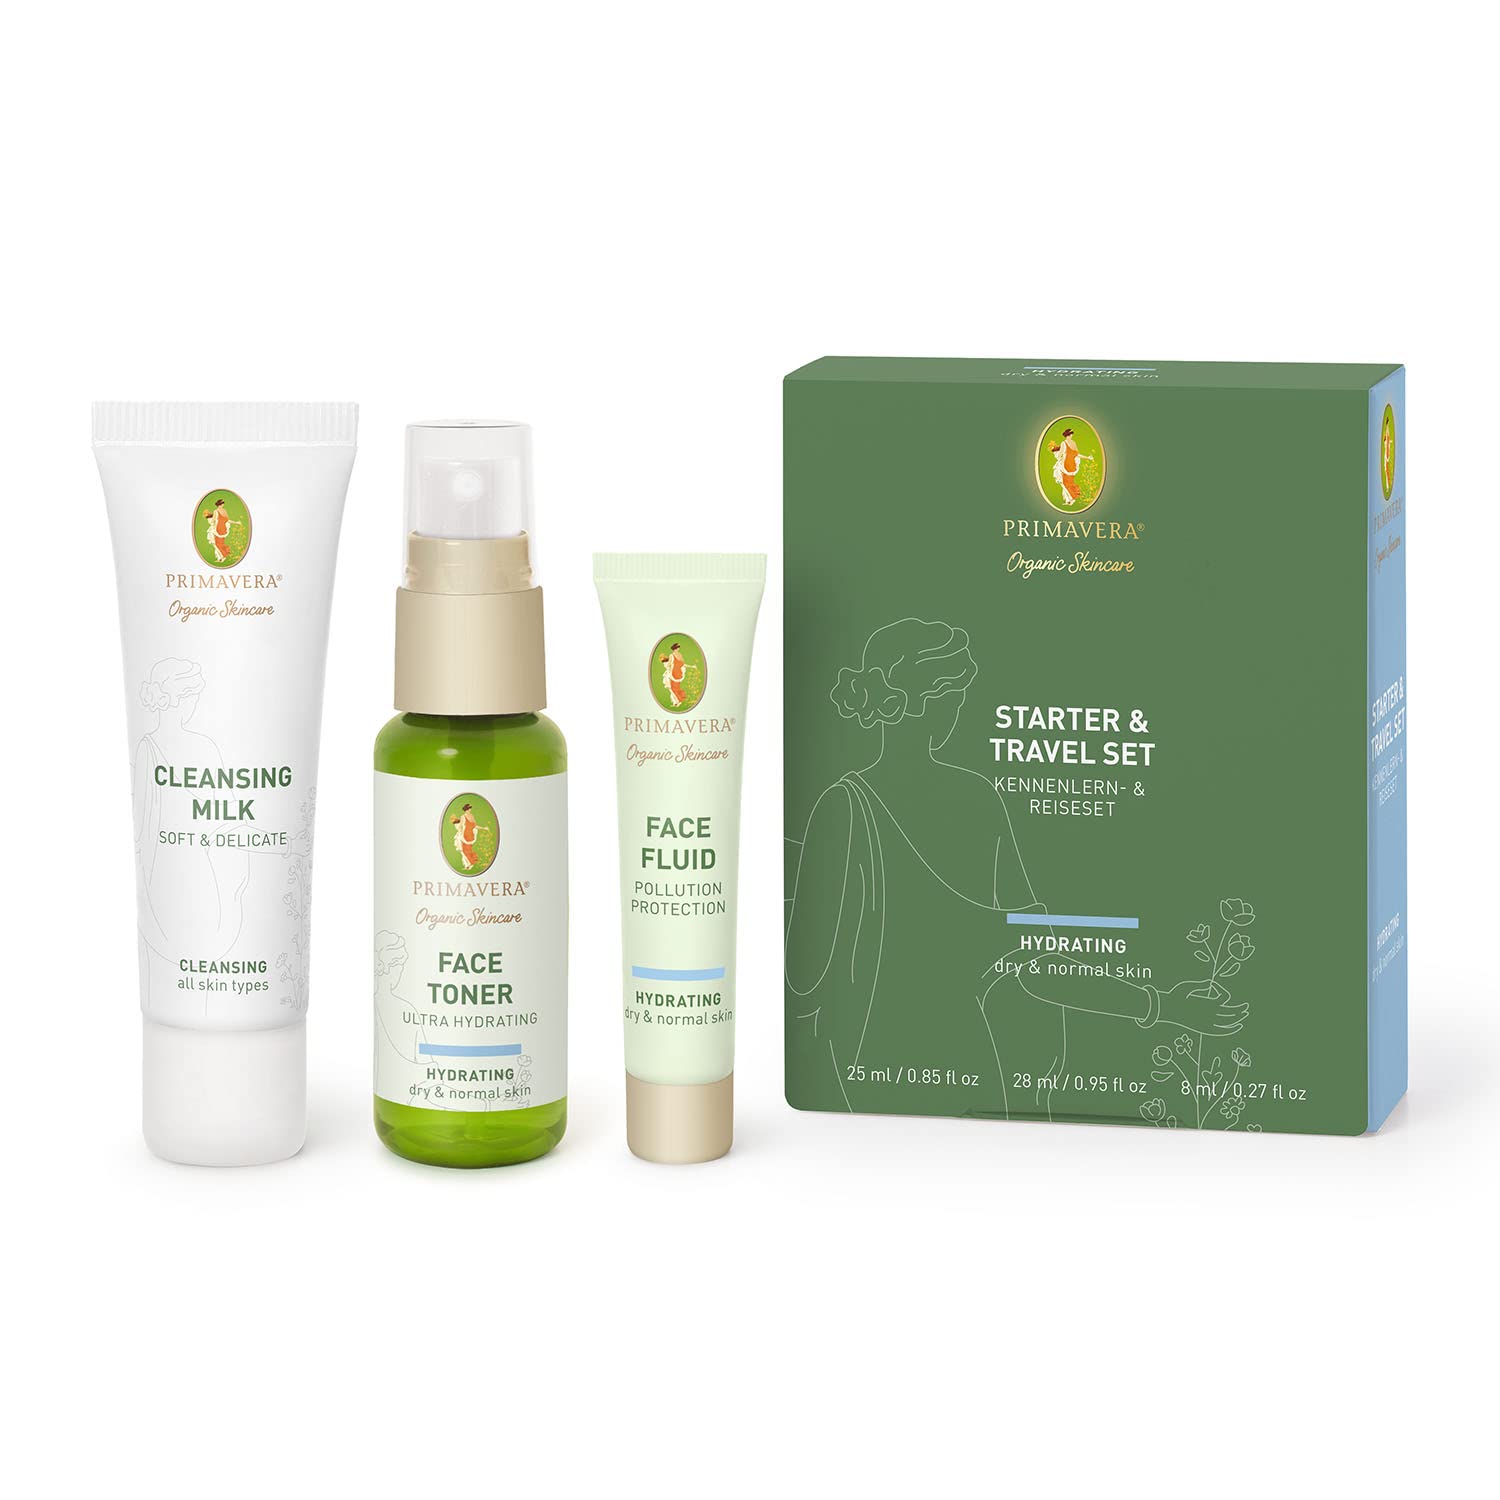 PRIMAVERA Starter & Travel Set Hydrating - Natural Cosmetics - Learning to know & Travel Set for Normal to Dry Skin - Gift Box Cleaning, Toner, Care - Vegan